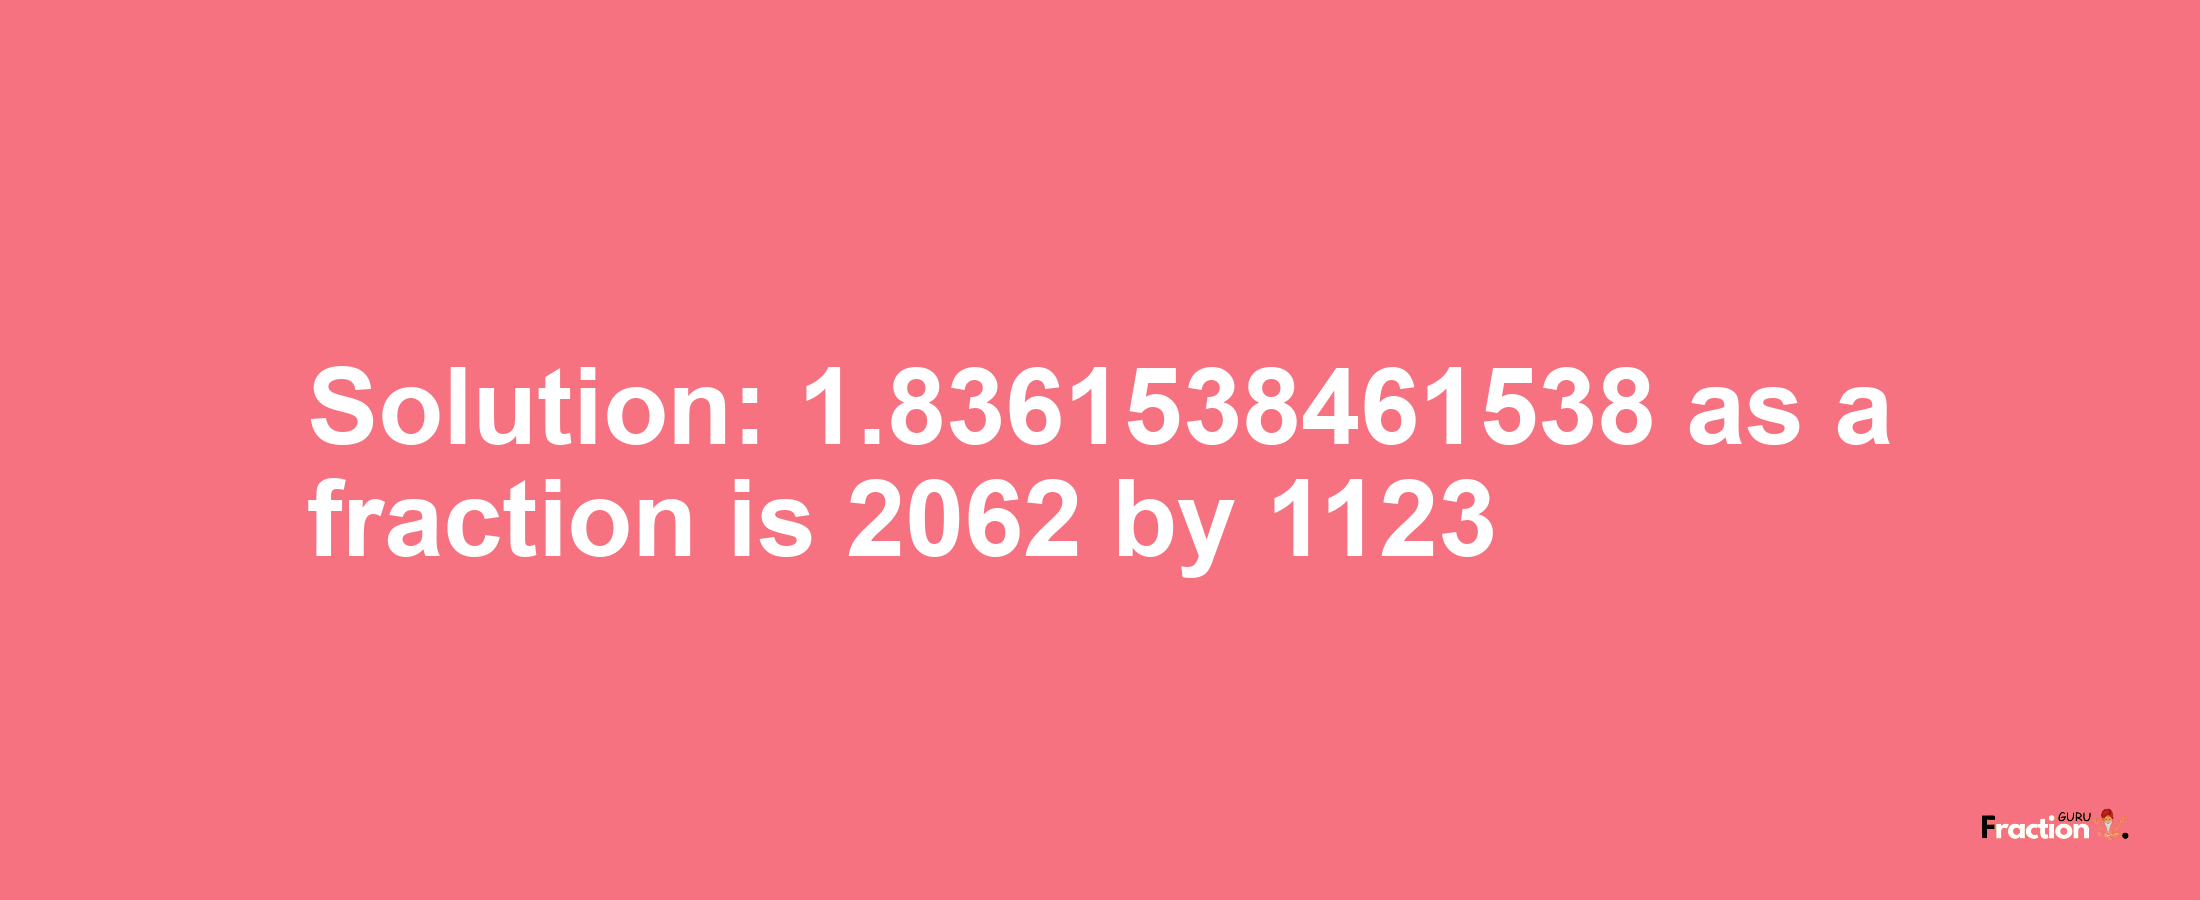 Solution:1.8361538461538 as a fraction is 2062/1123